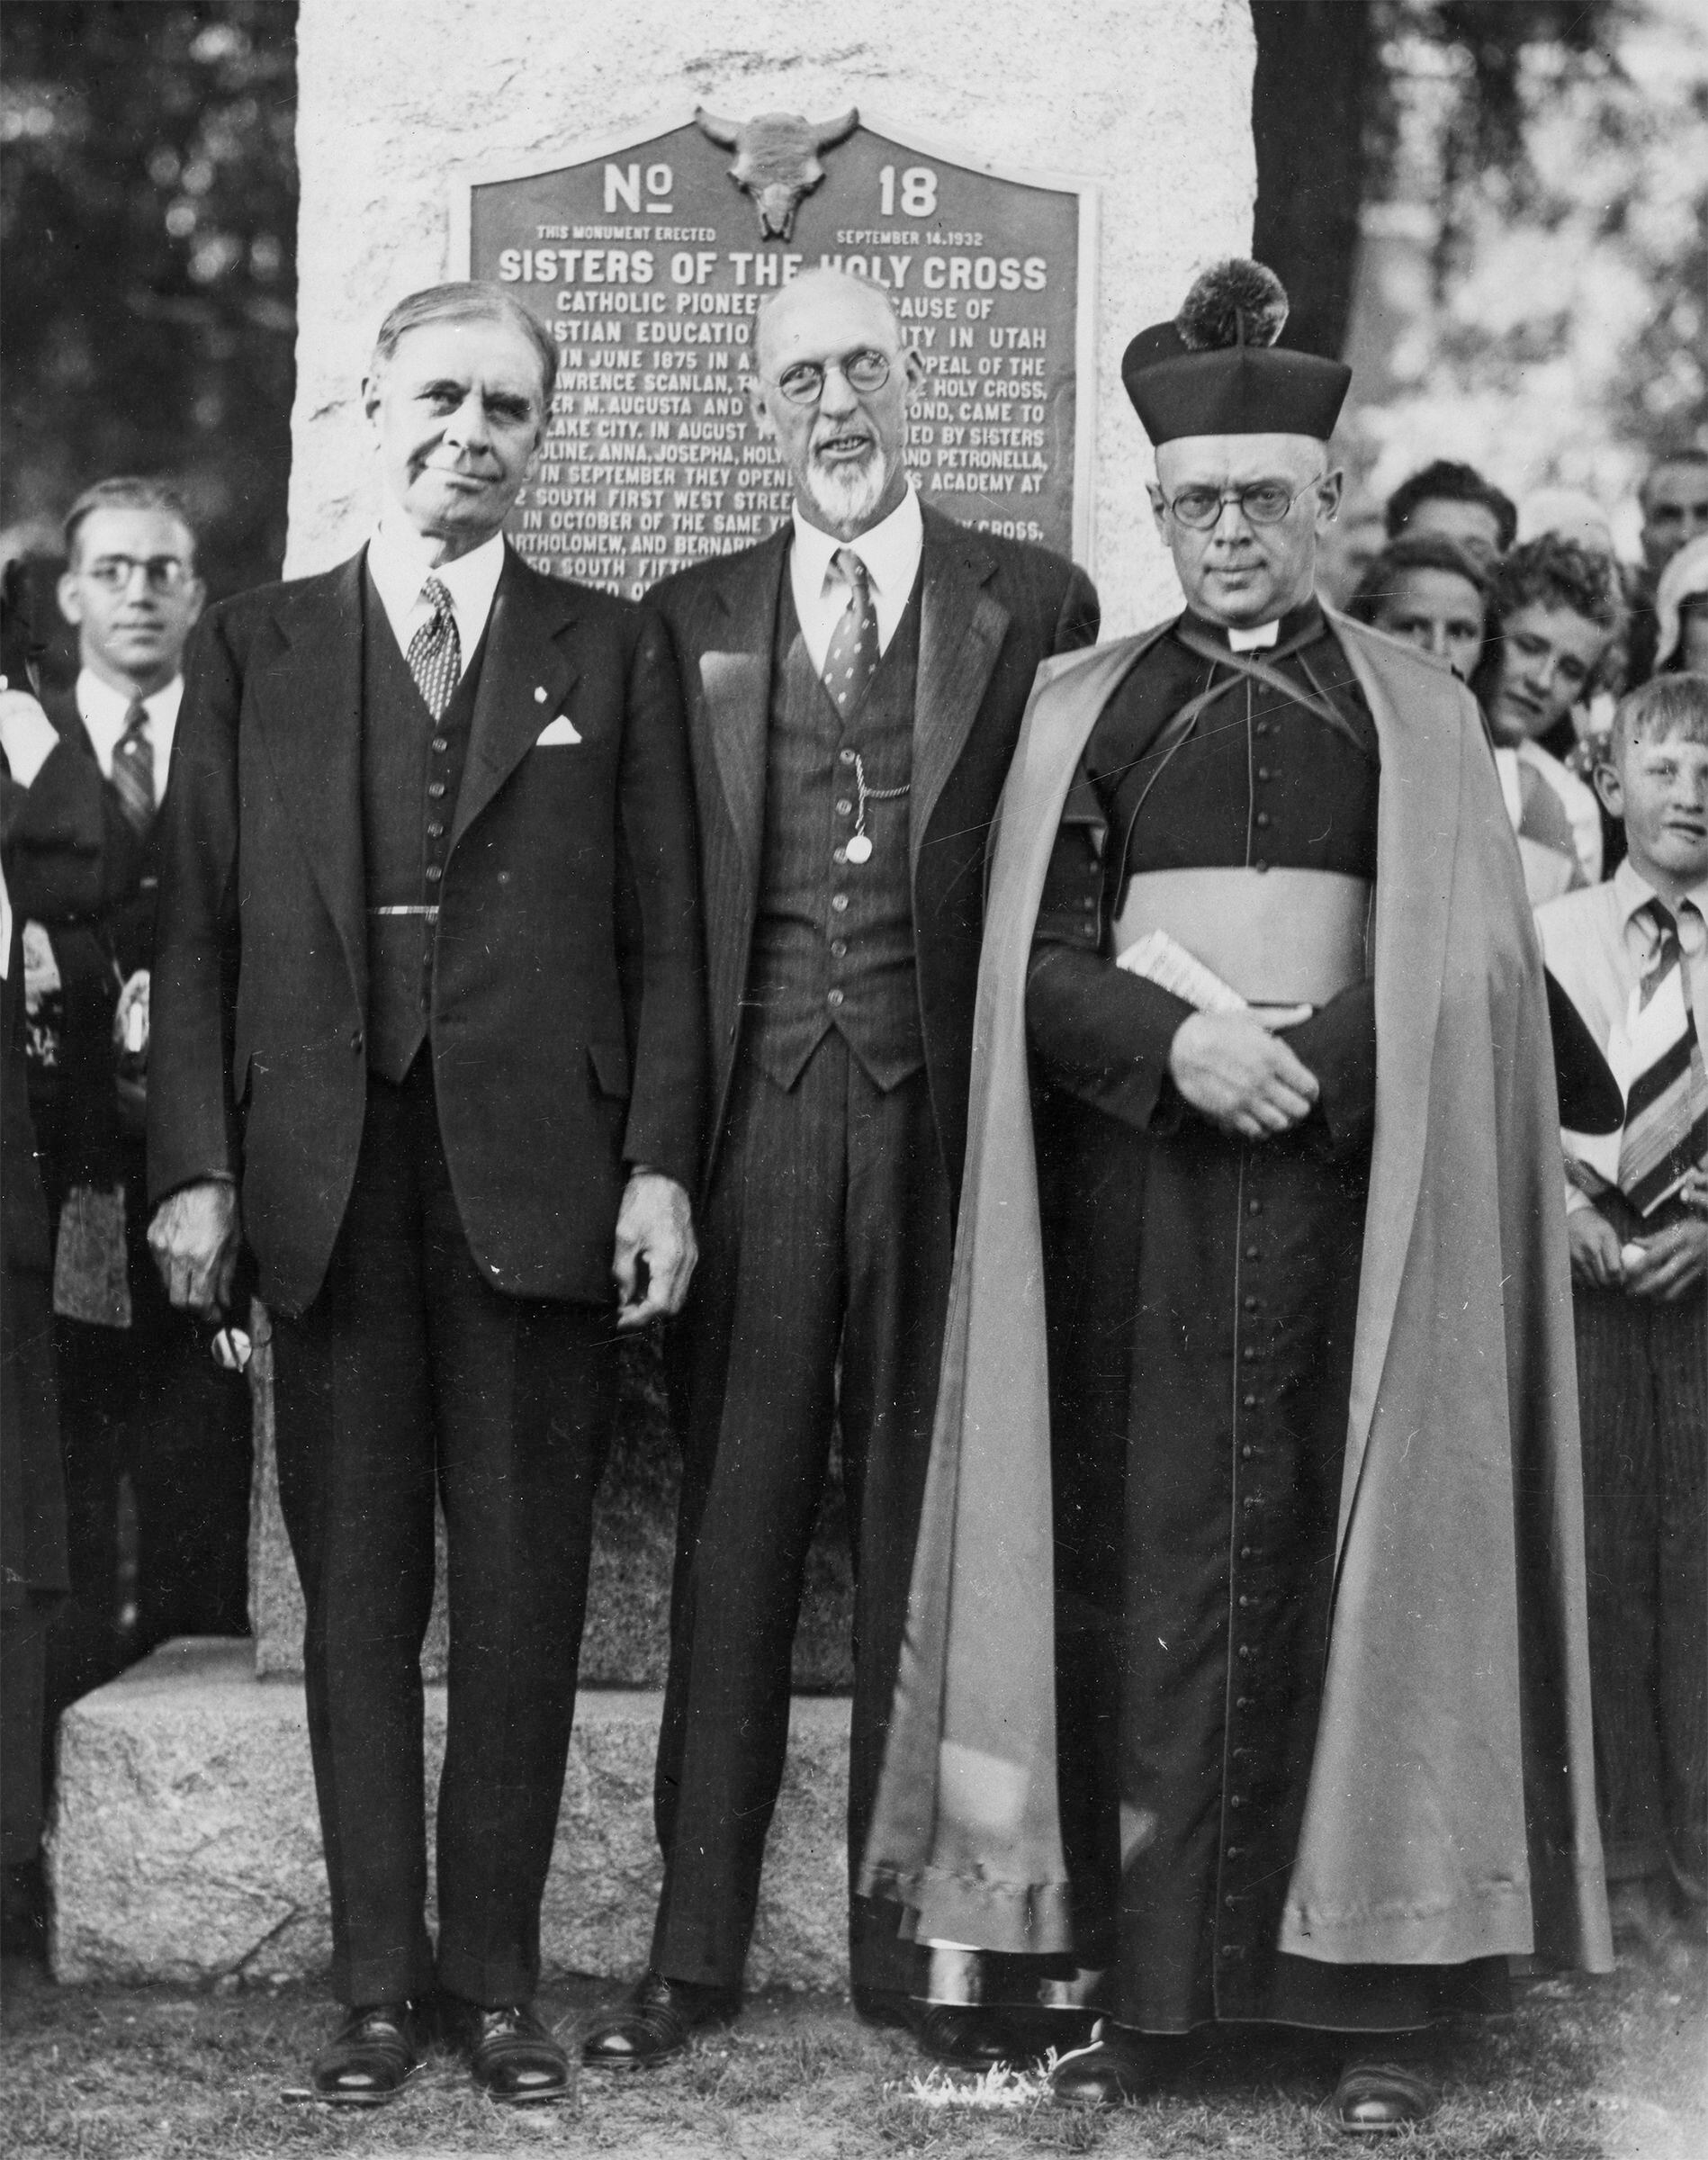 (Via the University of Utah) From left: Utah Gov. George Dern; Latter-day Saint apostle and future President George Albert Smith; and Monsignor Duane Hunt, who would become the Salt Lake City Diocese bishop in 1937, come together in September 1932 to unveil a monument honoring the Sisters of the Holy Cross for their contributions in education, health and social welfare.